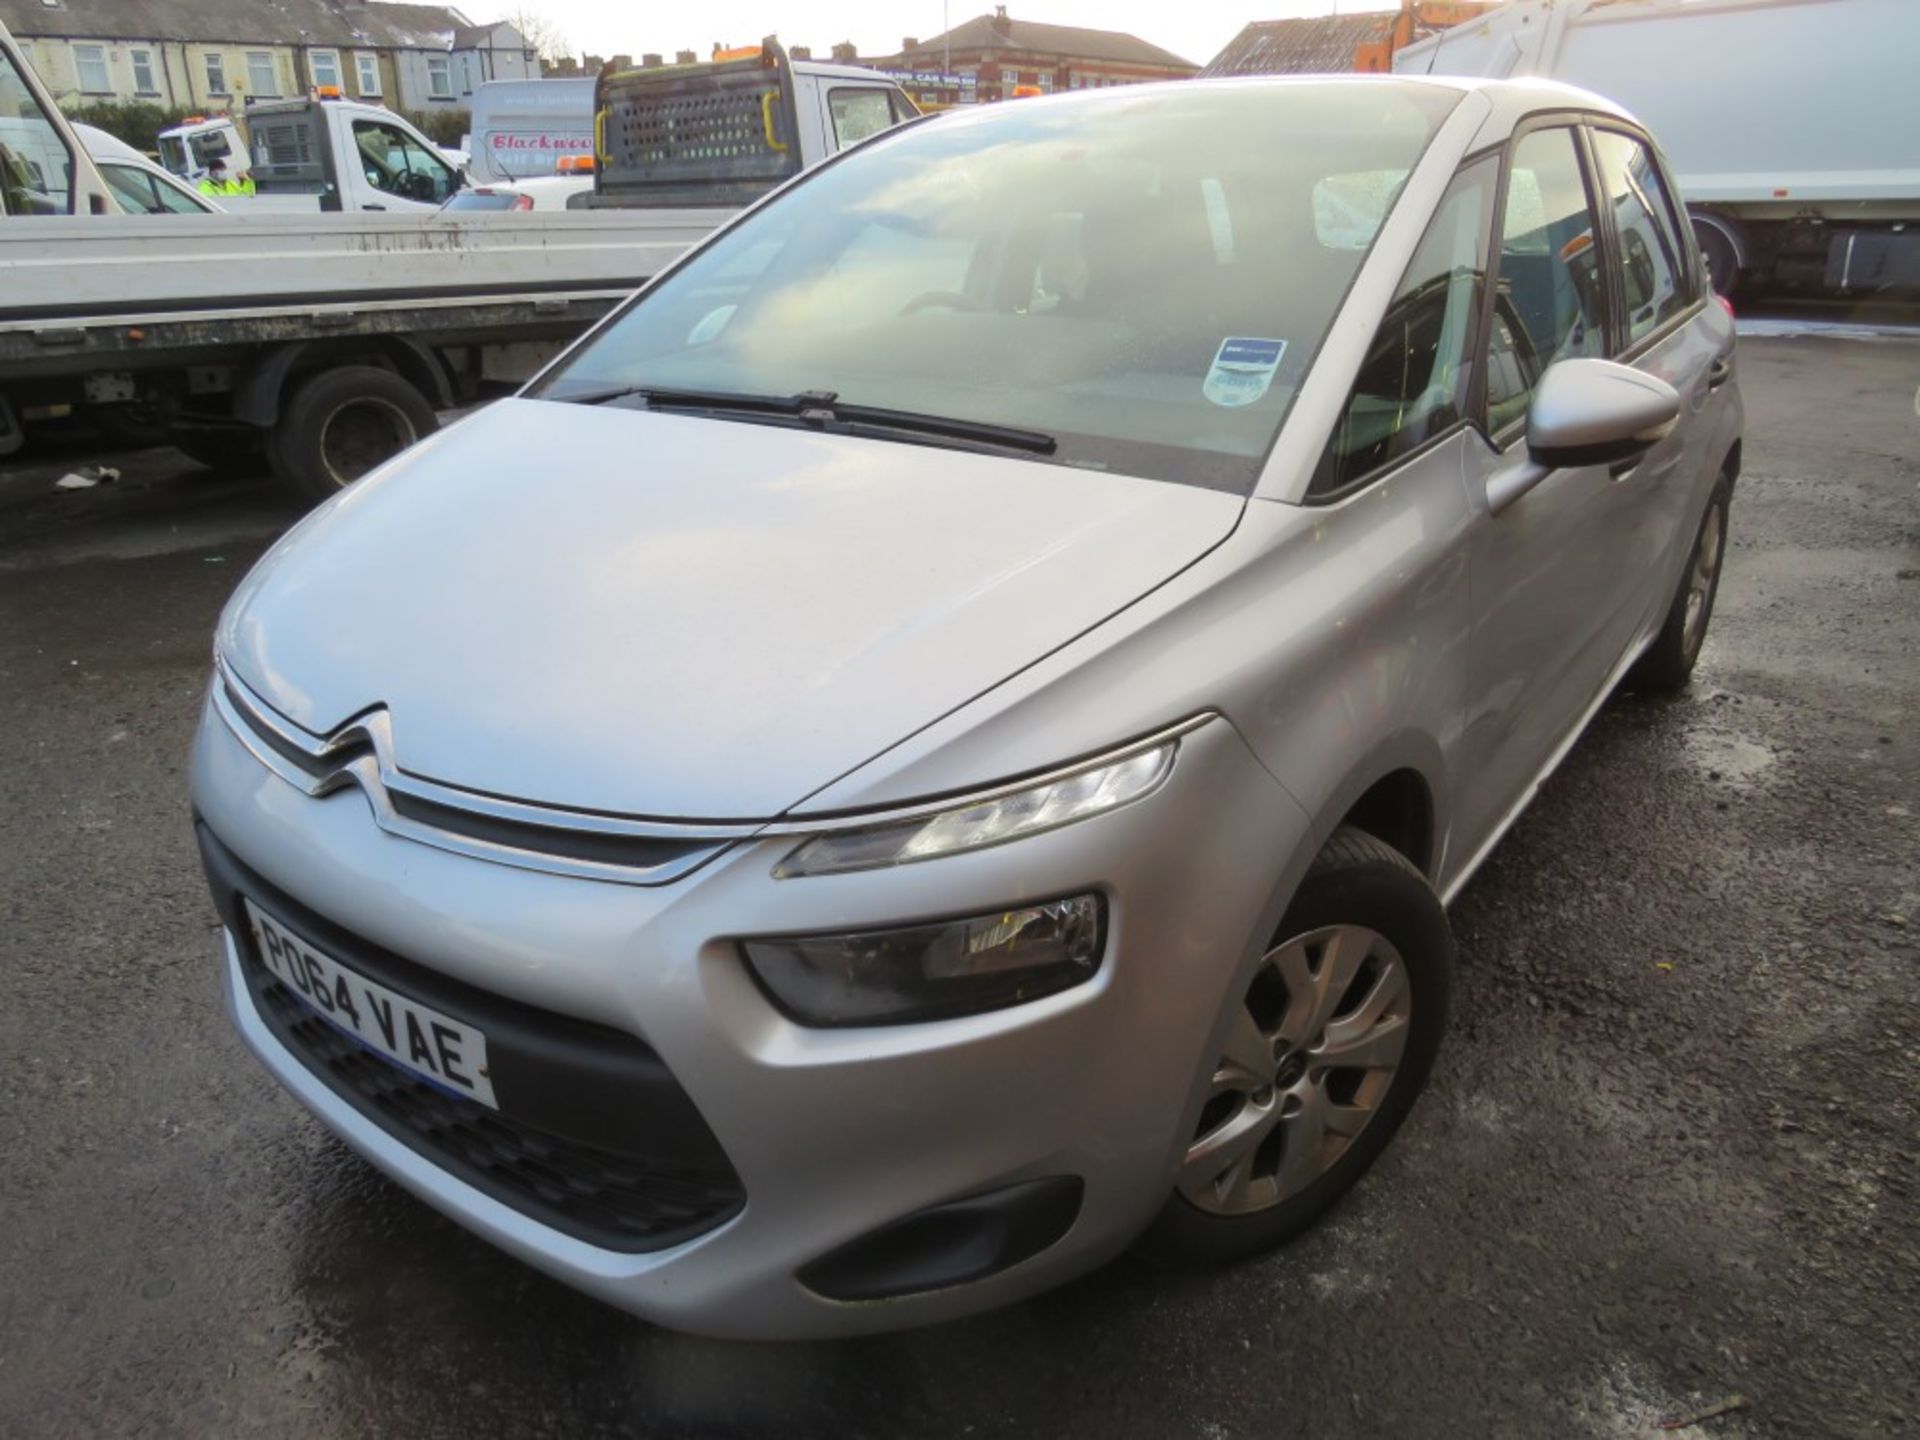 64 reg CITROEN C4 PICASSO VTR HDI (DIRECT COUNCIL) 1ST REG 09/14, 129691M, V5 HERE, 1 OWNER FROM NEW - Image 2 of 6